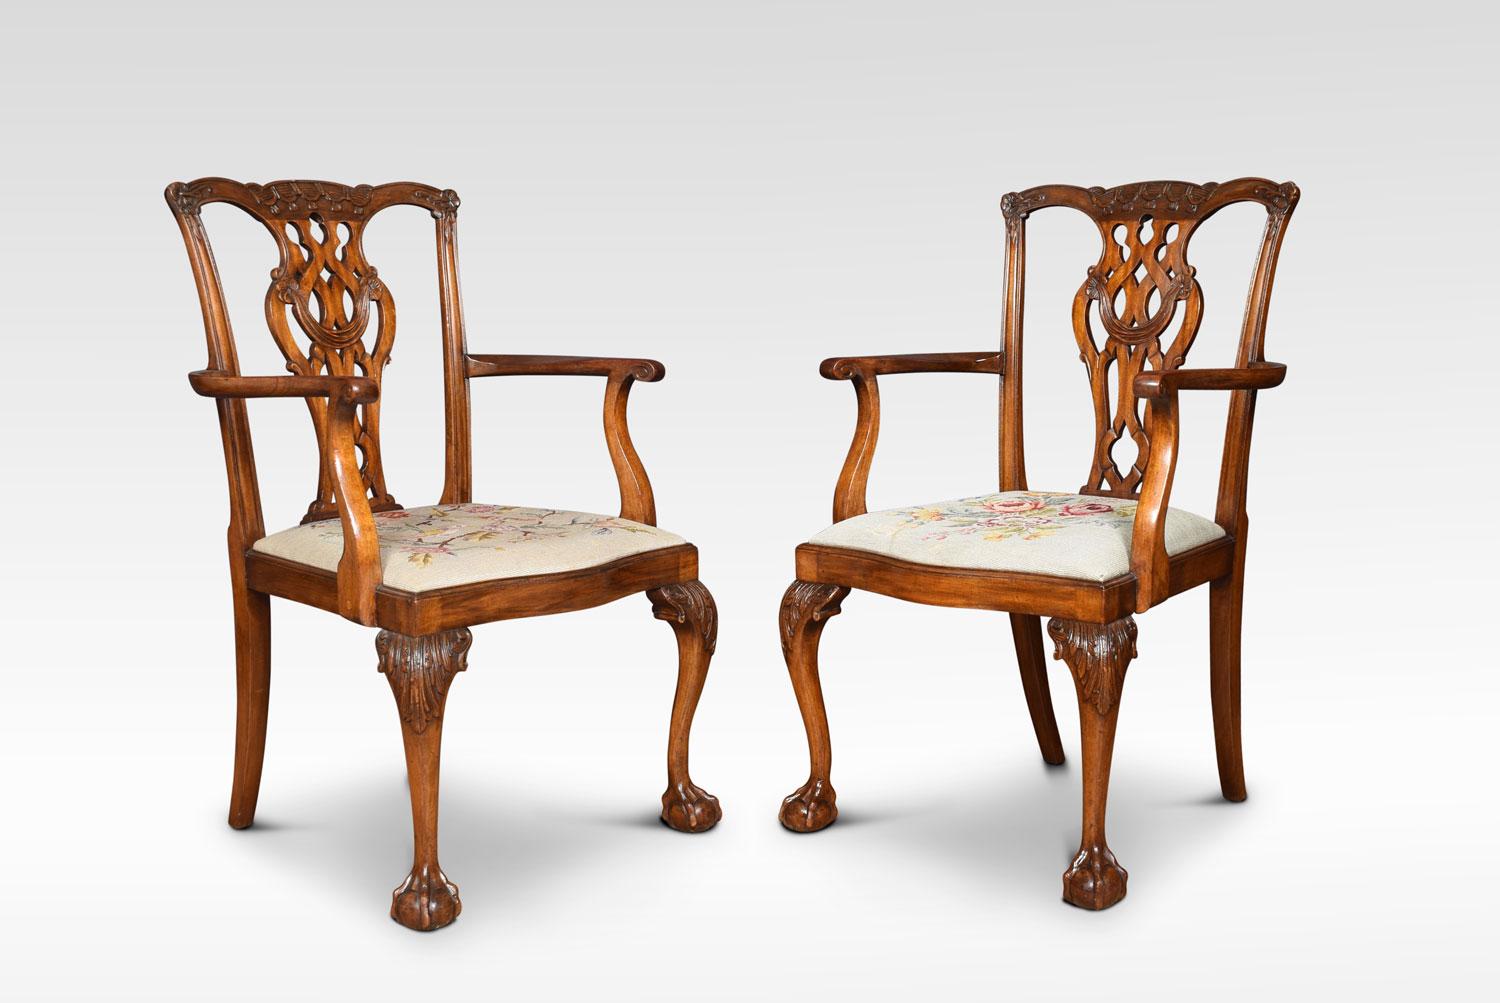 Set of eight mahogany dining chairs, the set consisting of two carvers and six single chairs. Each with yoked crest rail above a pierced splat with quatrefoil cut-outs over a drop-in needlepoint seat, each chair seat is different. All raised up on